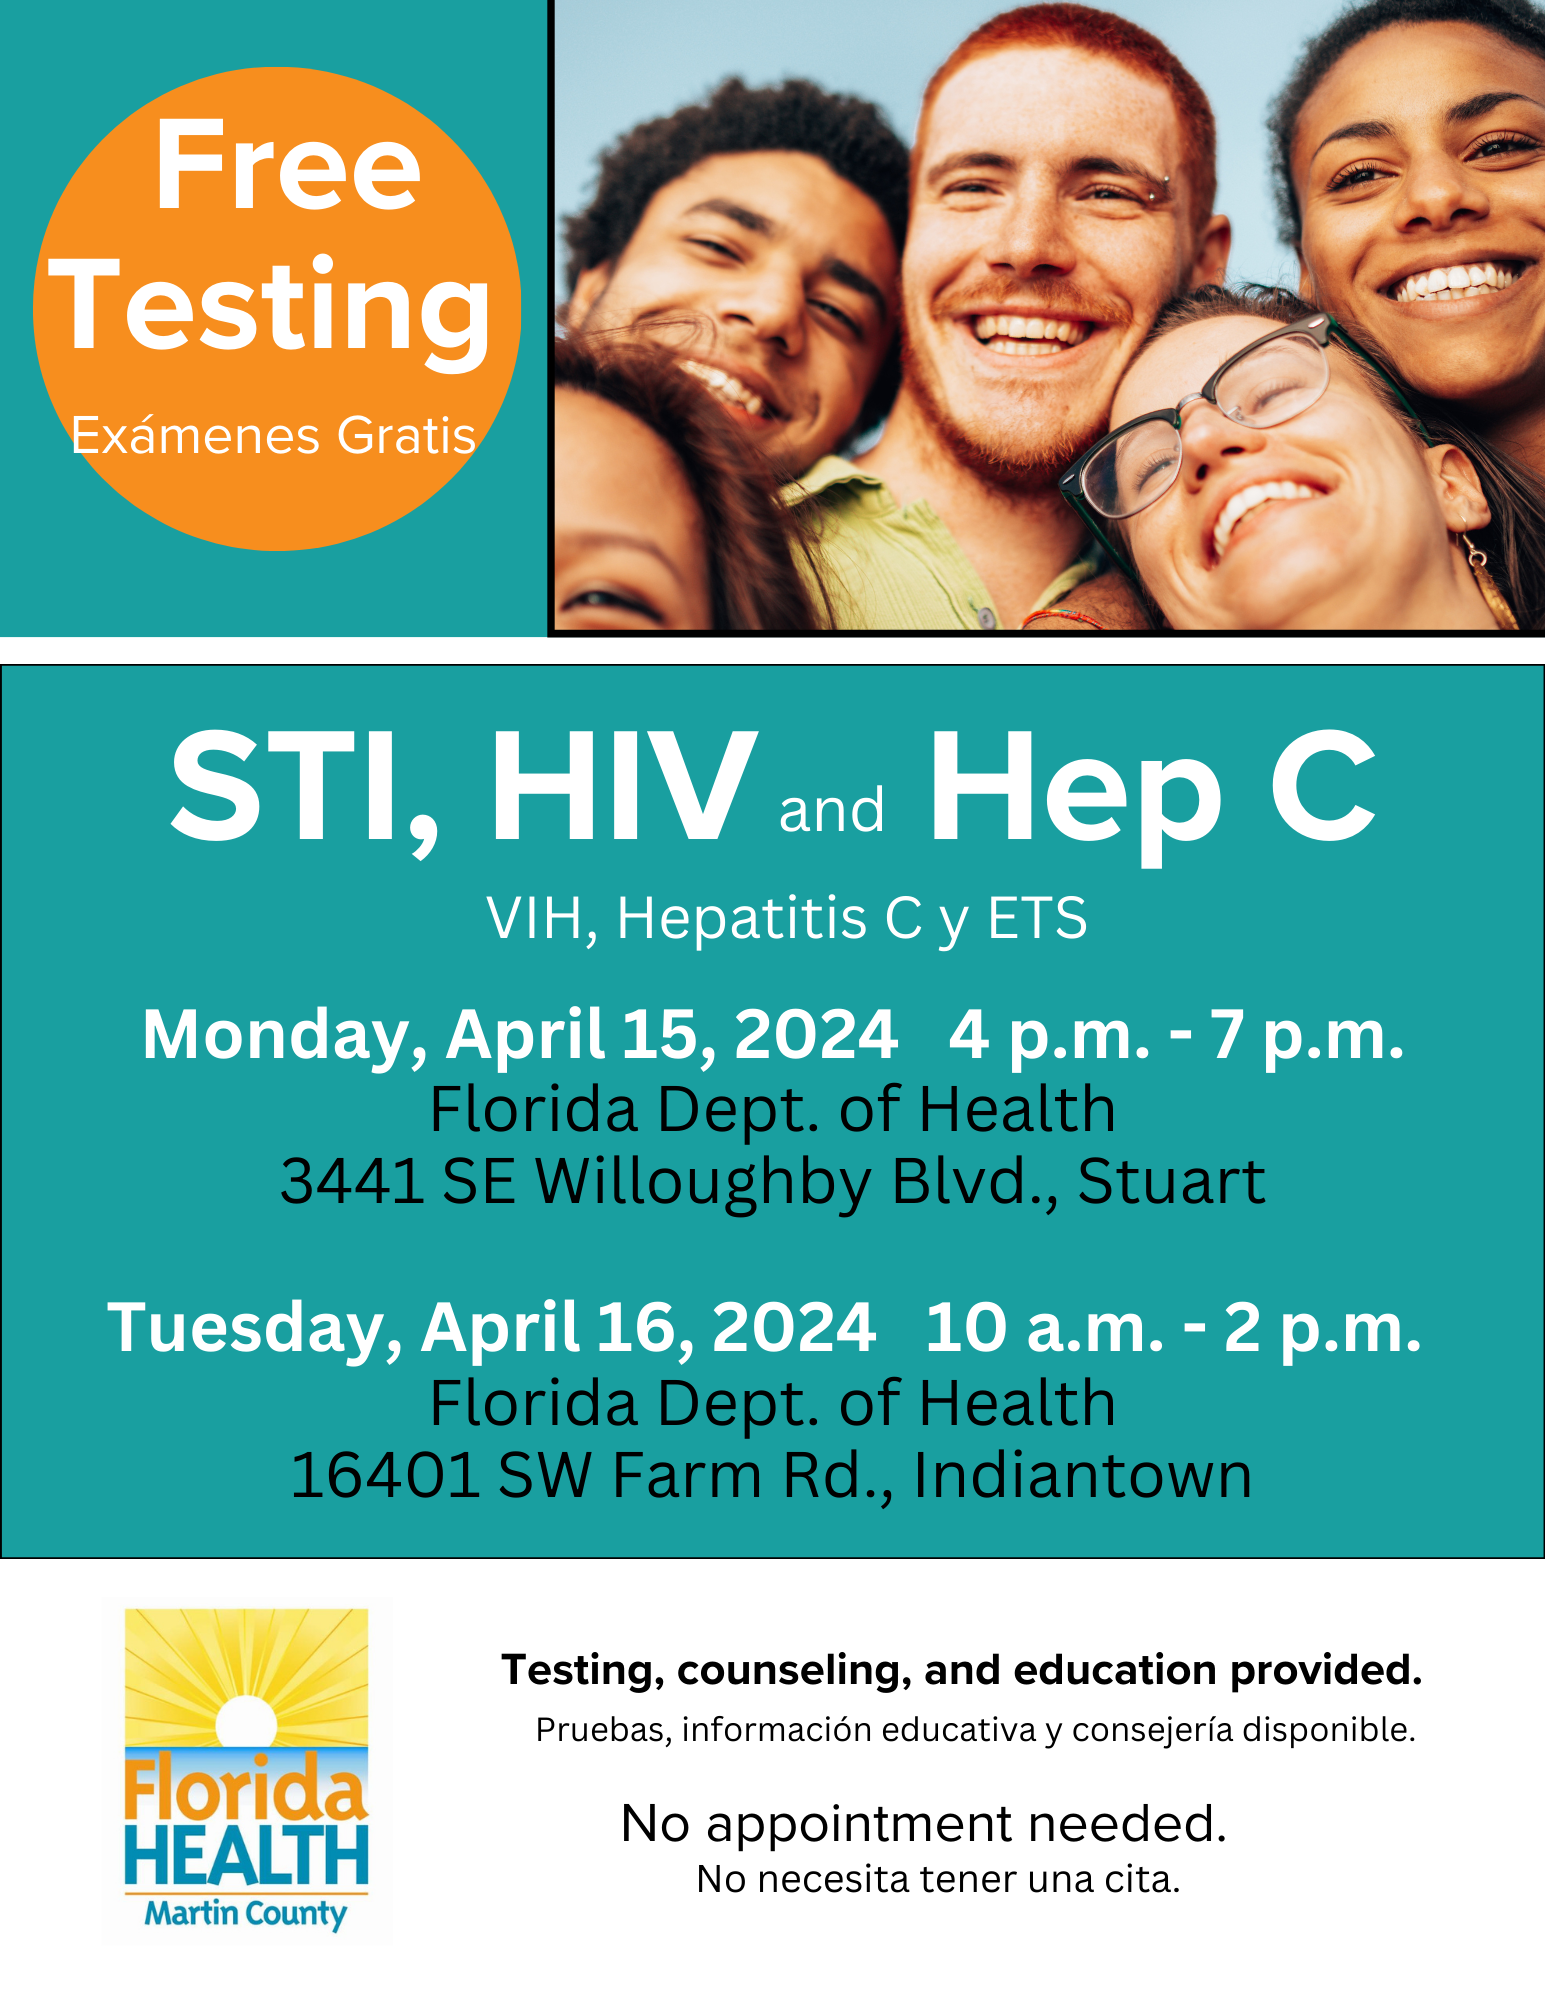  Free STI, HIV, and Hep C Testing on Monday, April 15, 2024, from 4 p.m. – 7 p.m. at the Florida Department of Health at 3441 SE Willoughby Blvd., Stuart and on Tuesday, April 16, 2024, from 10 a.m. – 2 p.m. Testing, Counseling and education provided. No appointment needed.